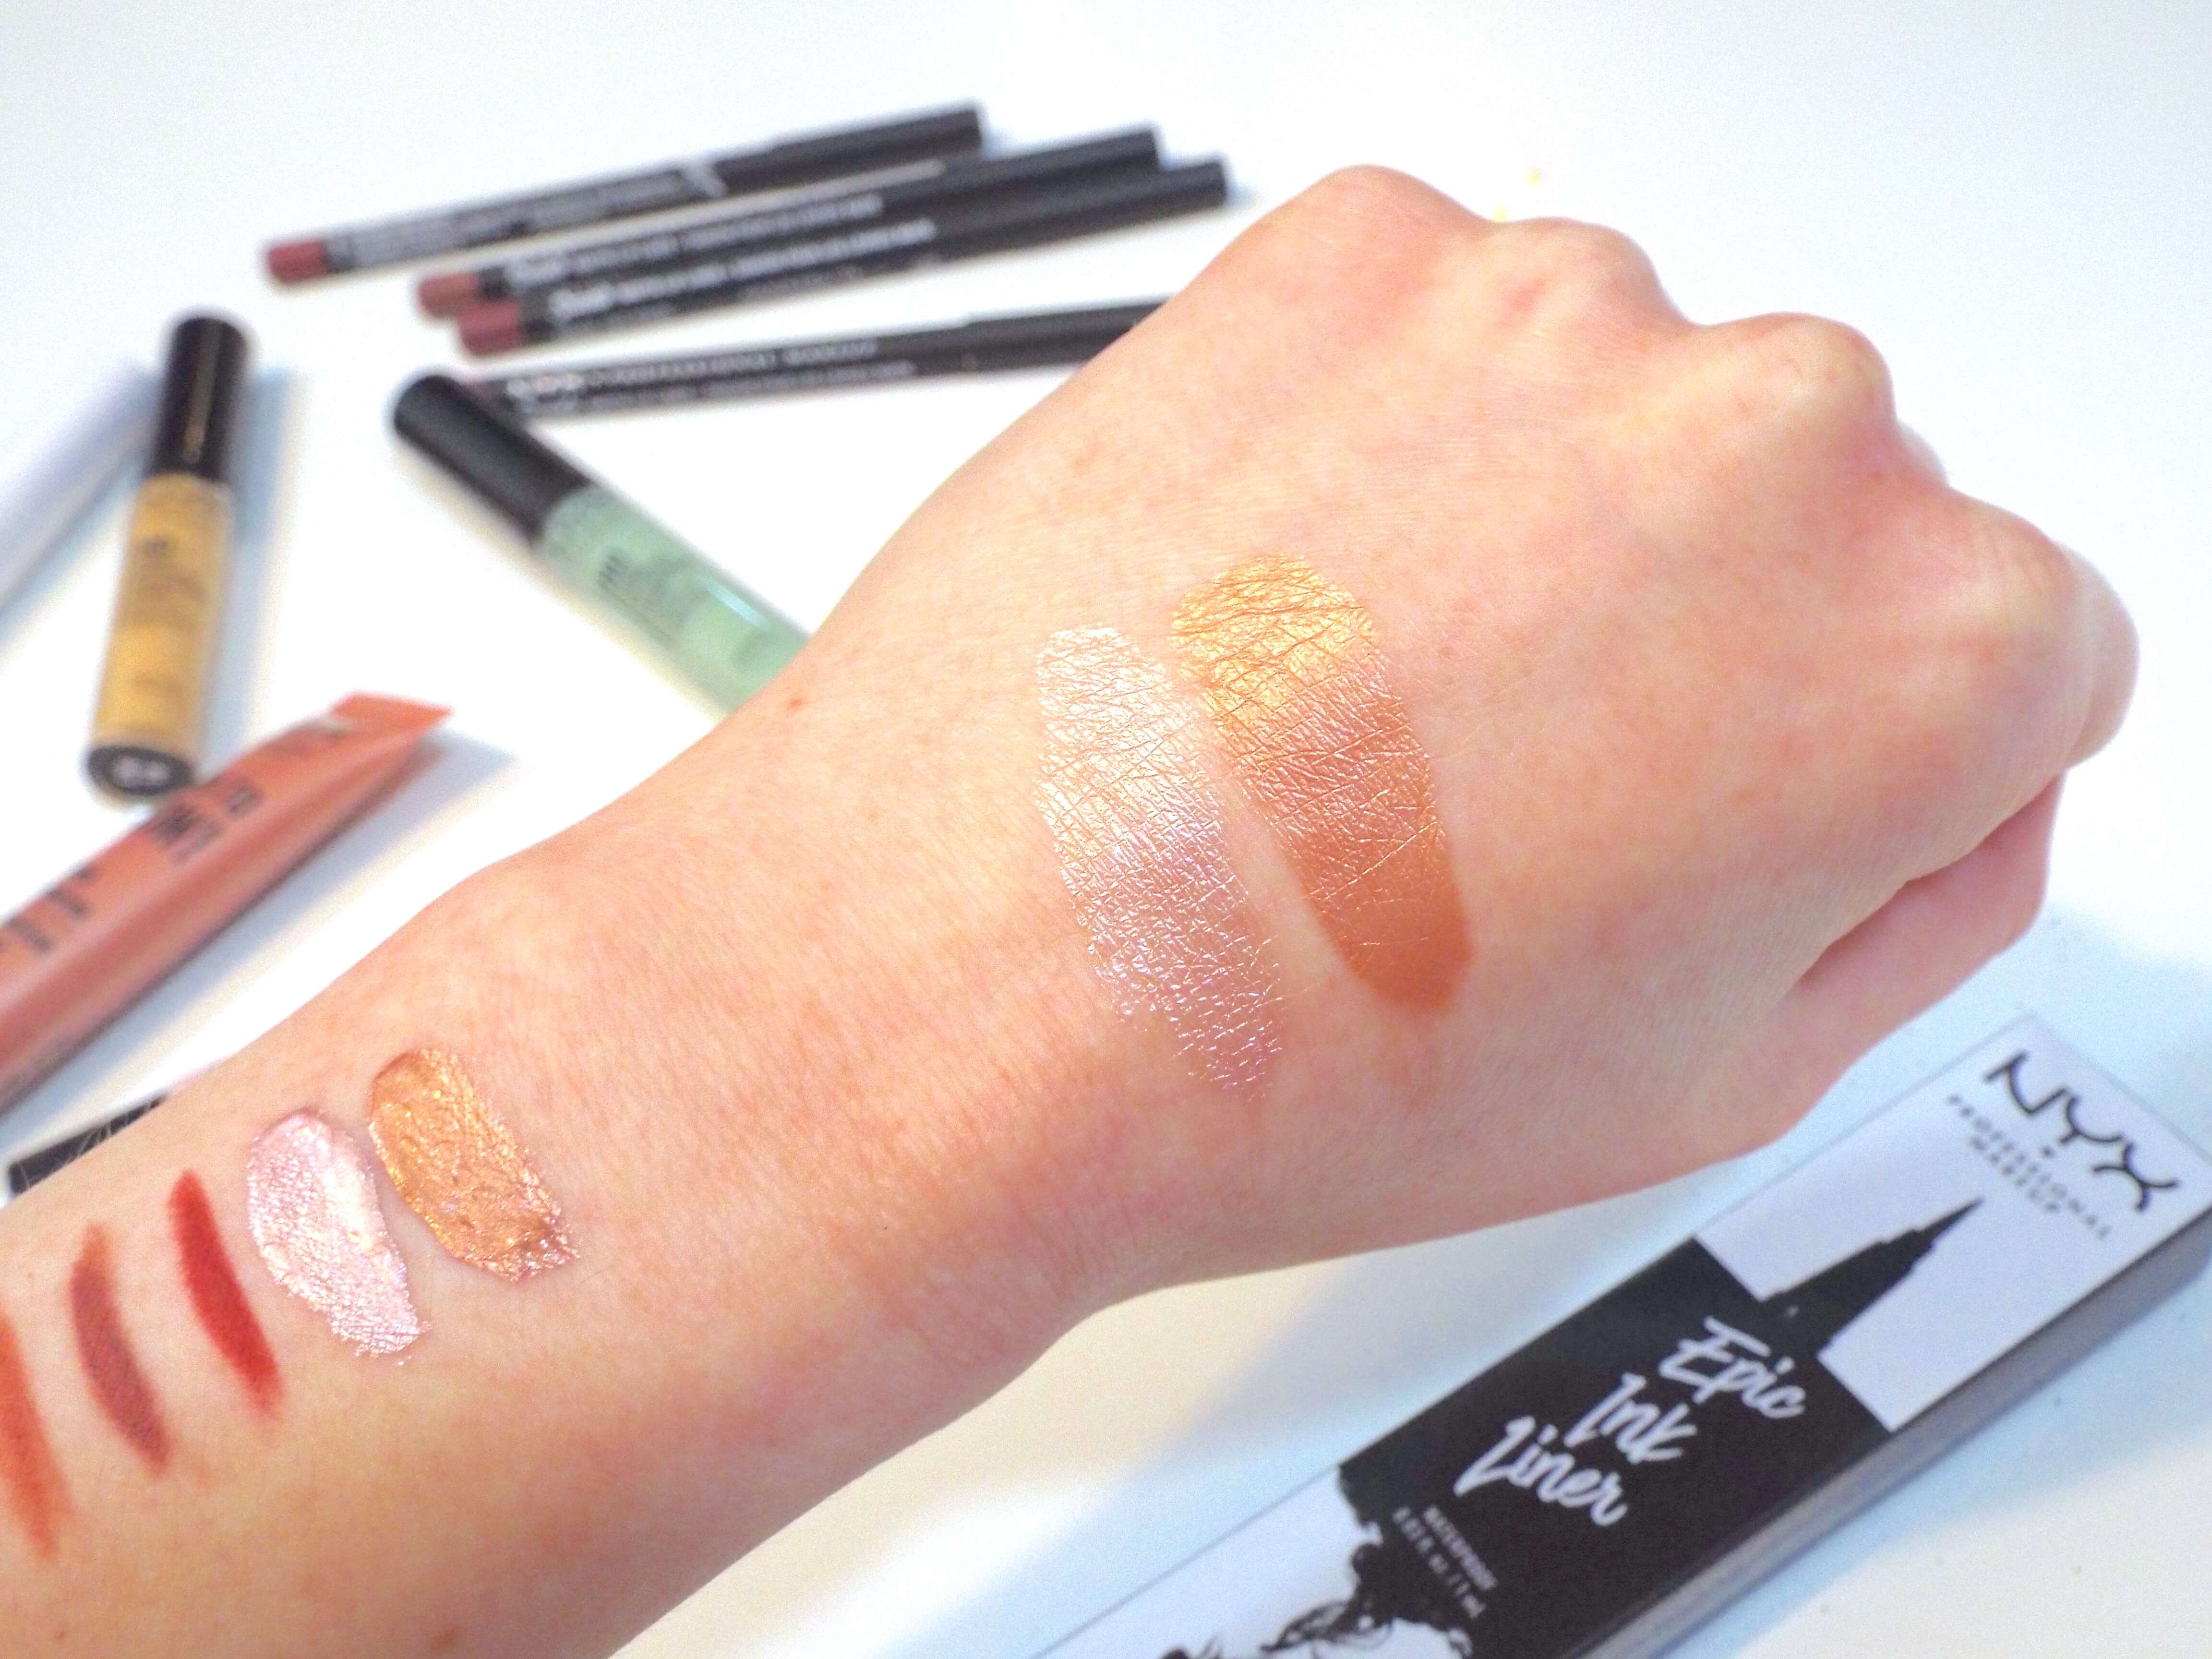 Swatches of the two NYX Born to Glow Liquid Illuminators, in Sunbeam and Gleam, blended out more on the hand, giving a sheerer but still strong pay-off colour.